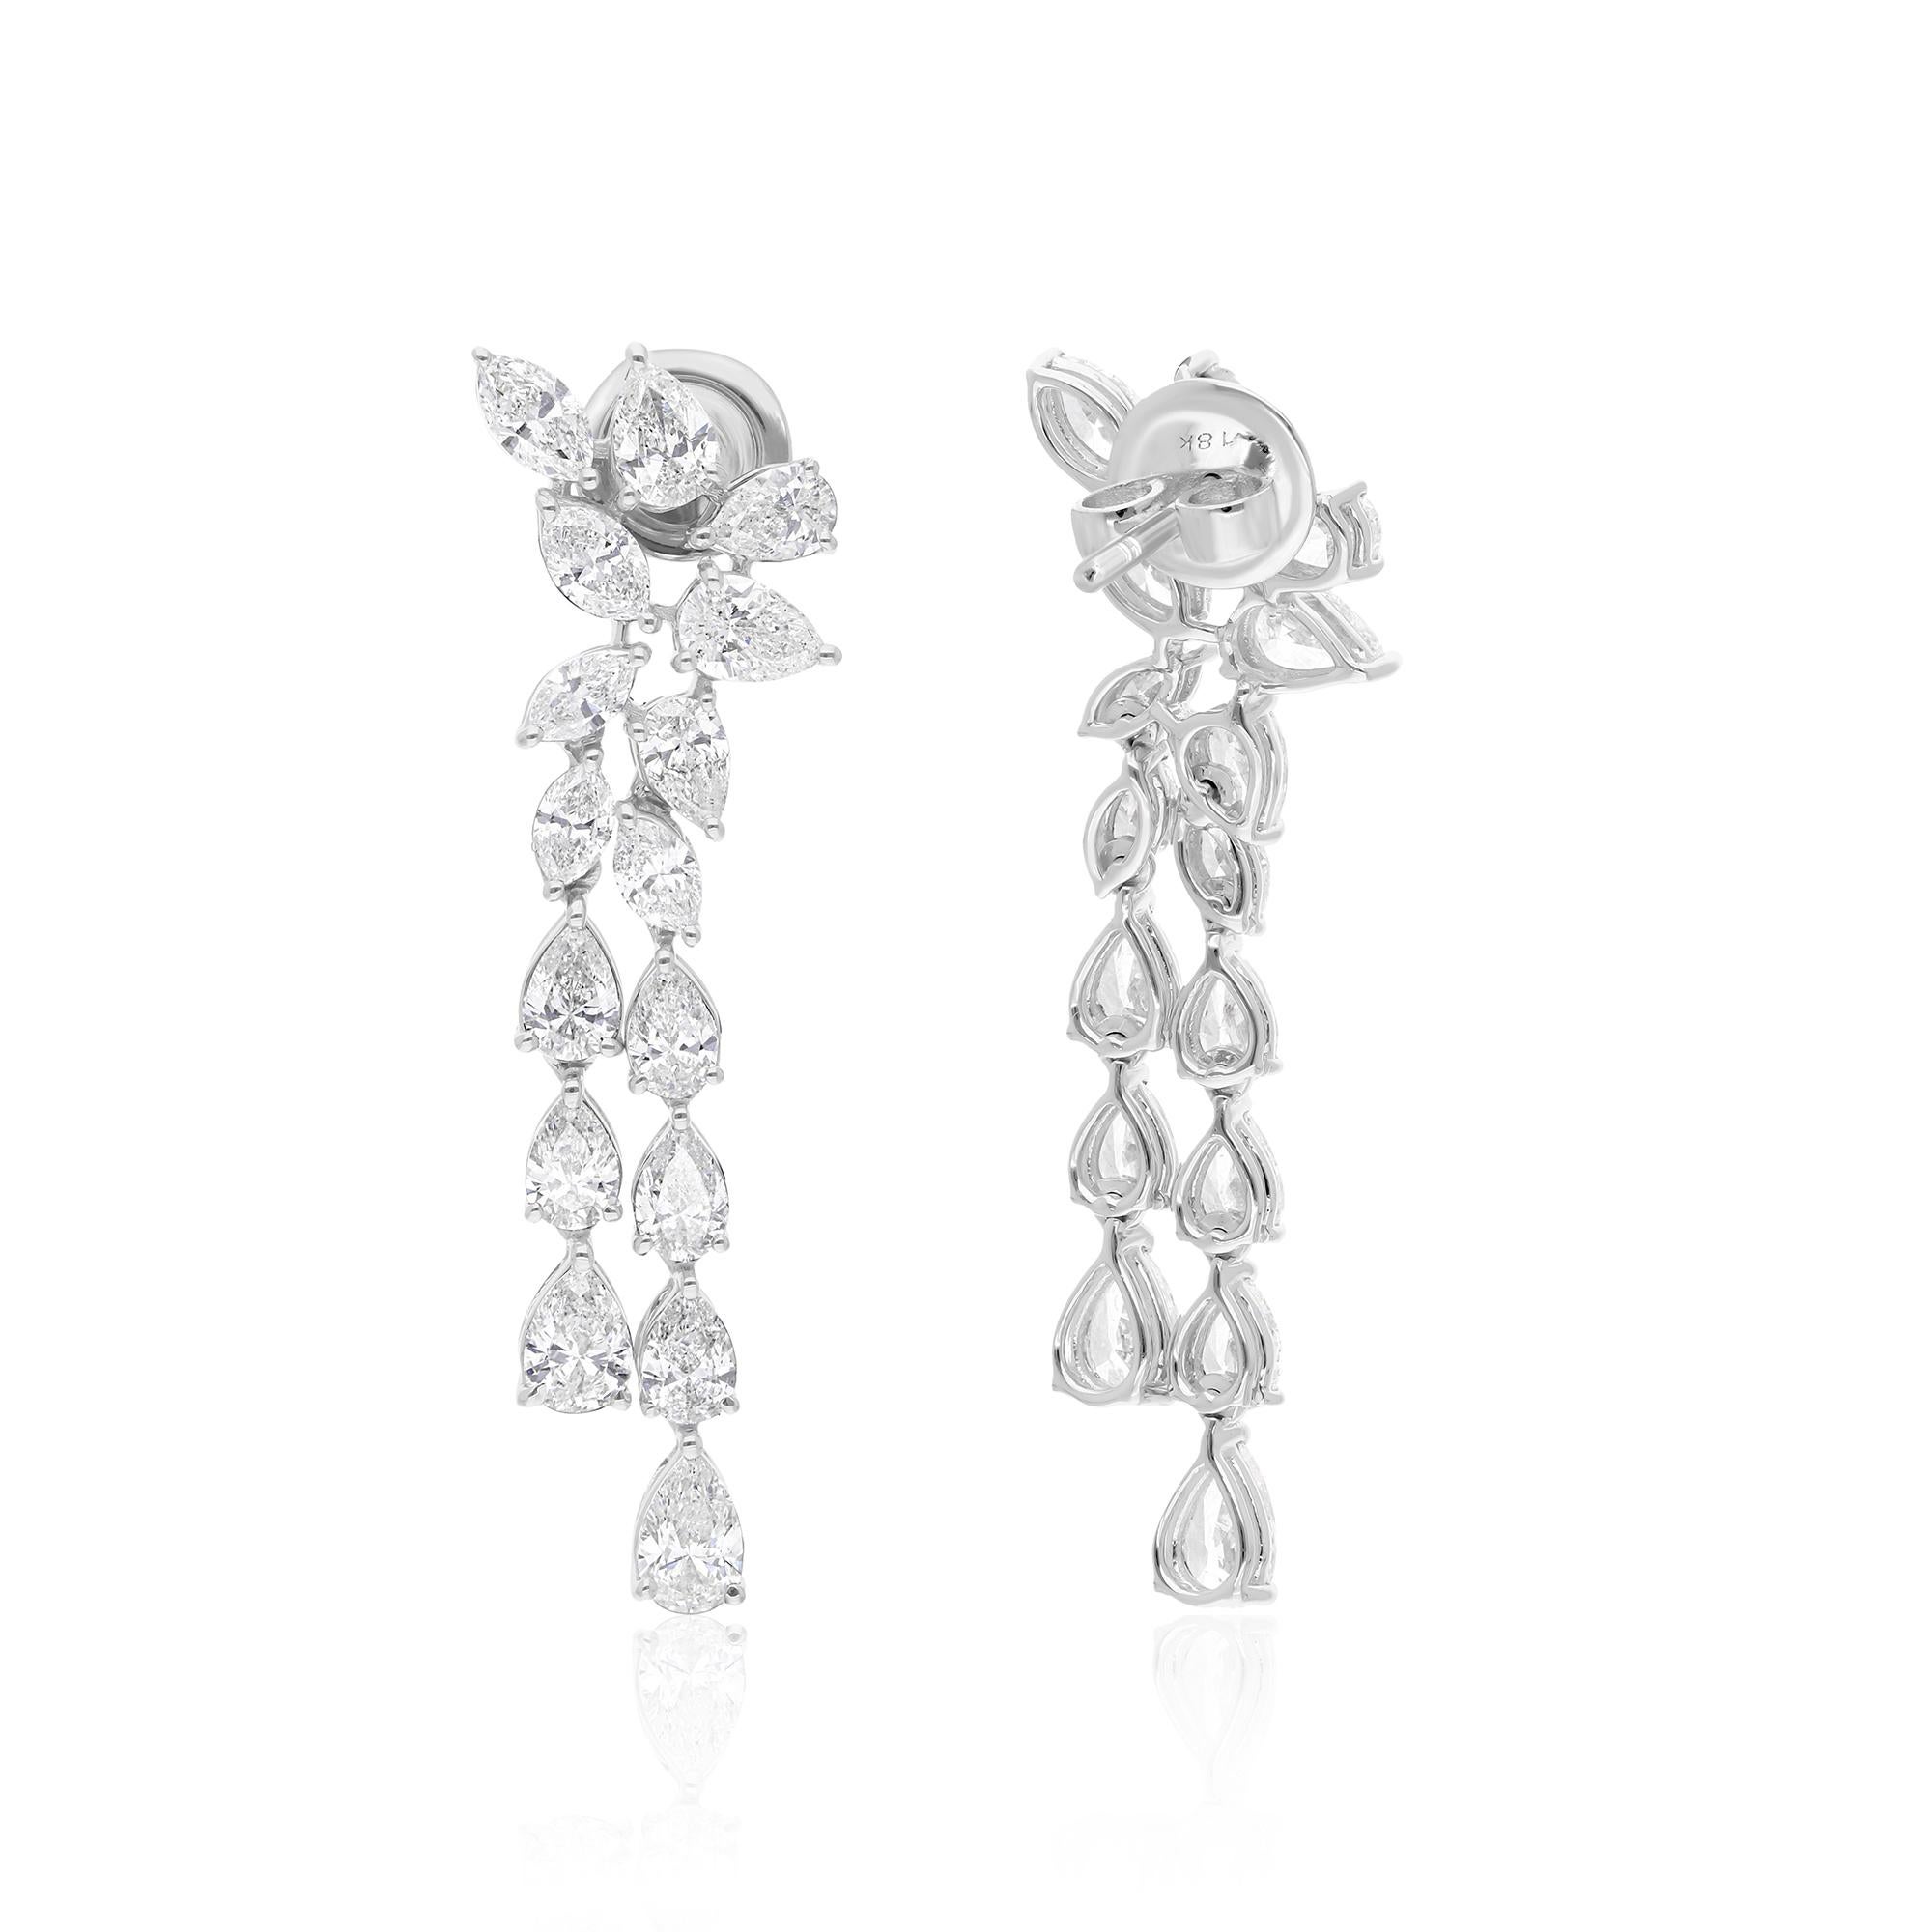 The focal point of these earrings is the pear-cut diamond, gracefully suspended from the earlobe, showcasing its classic teardrop shape. This elegant diamond is embraced by a halo of smaller, round diamonds, accentuating its natural beauty and